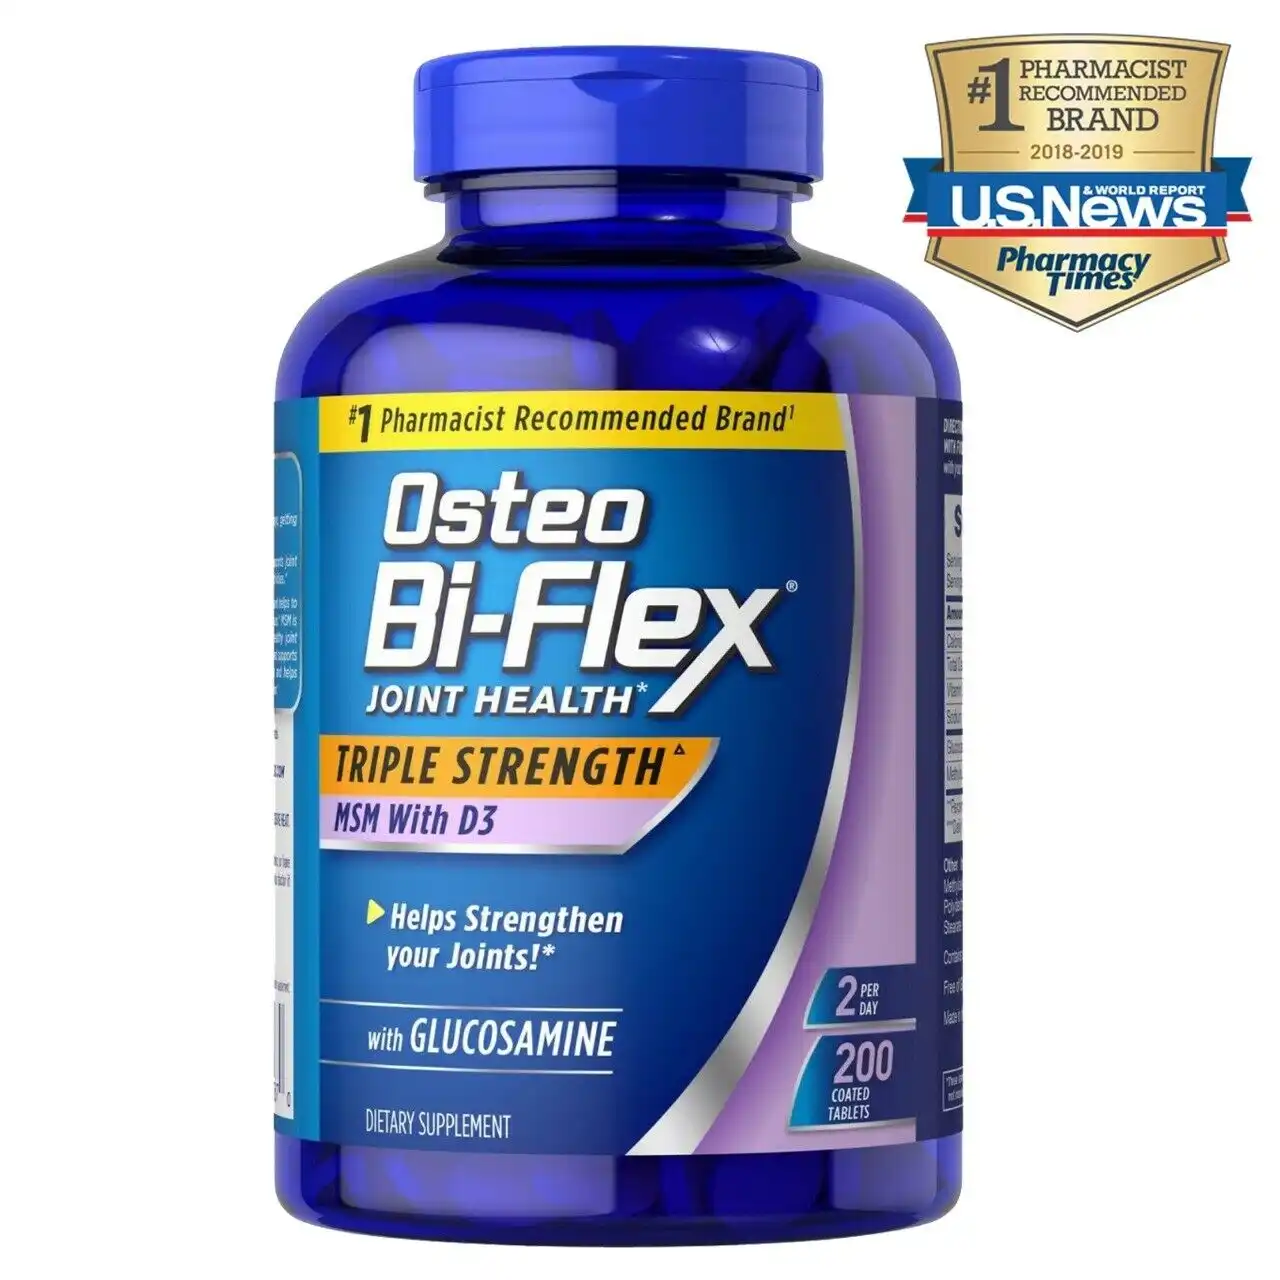 Hot Selling Osteo Bi-Flex 200 Tablets Glucosamine Triple Strength MSM Chondroitin Vitamin D3 Joint Health Supplement Made in USA